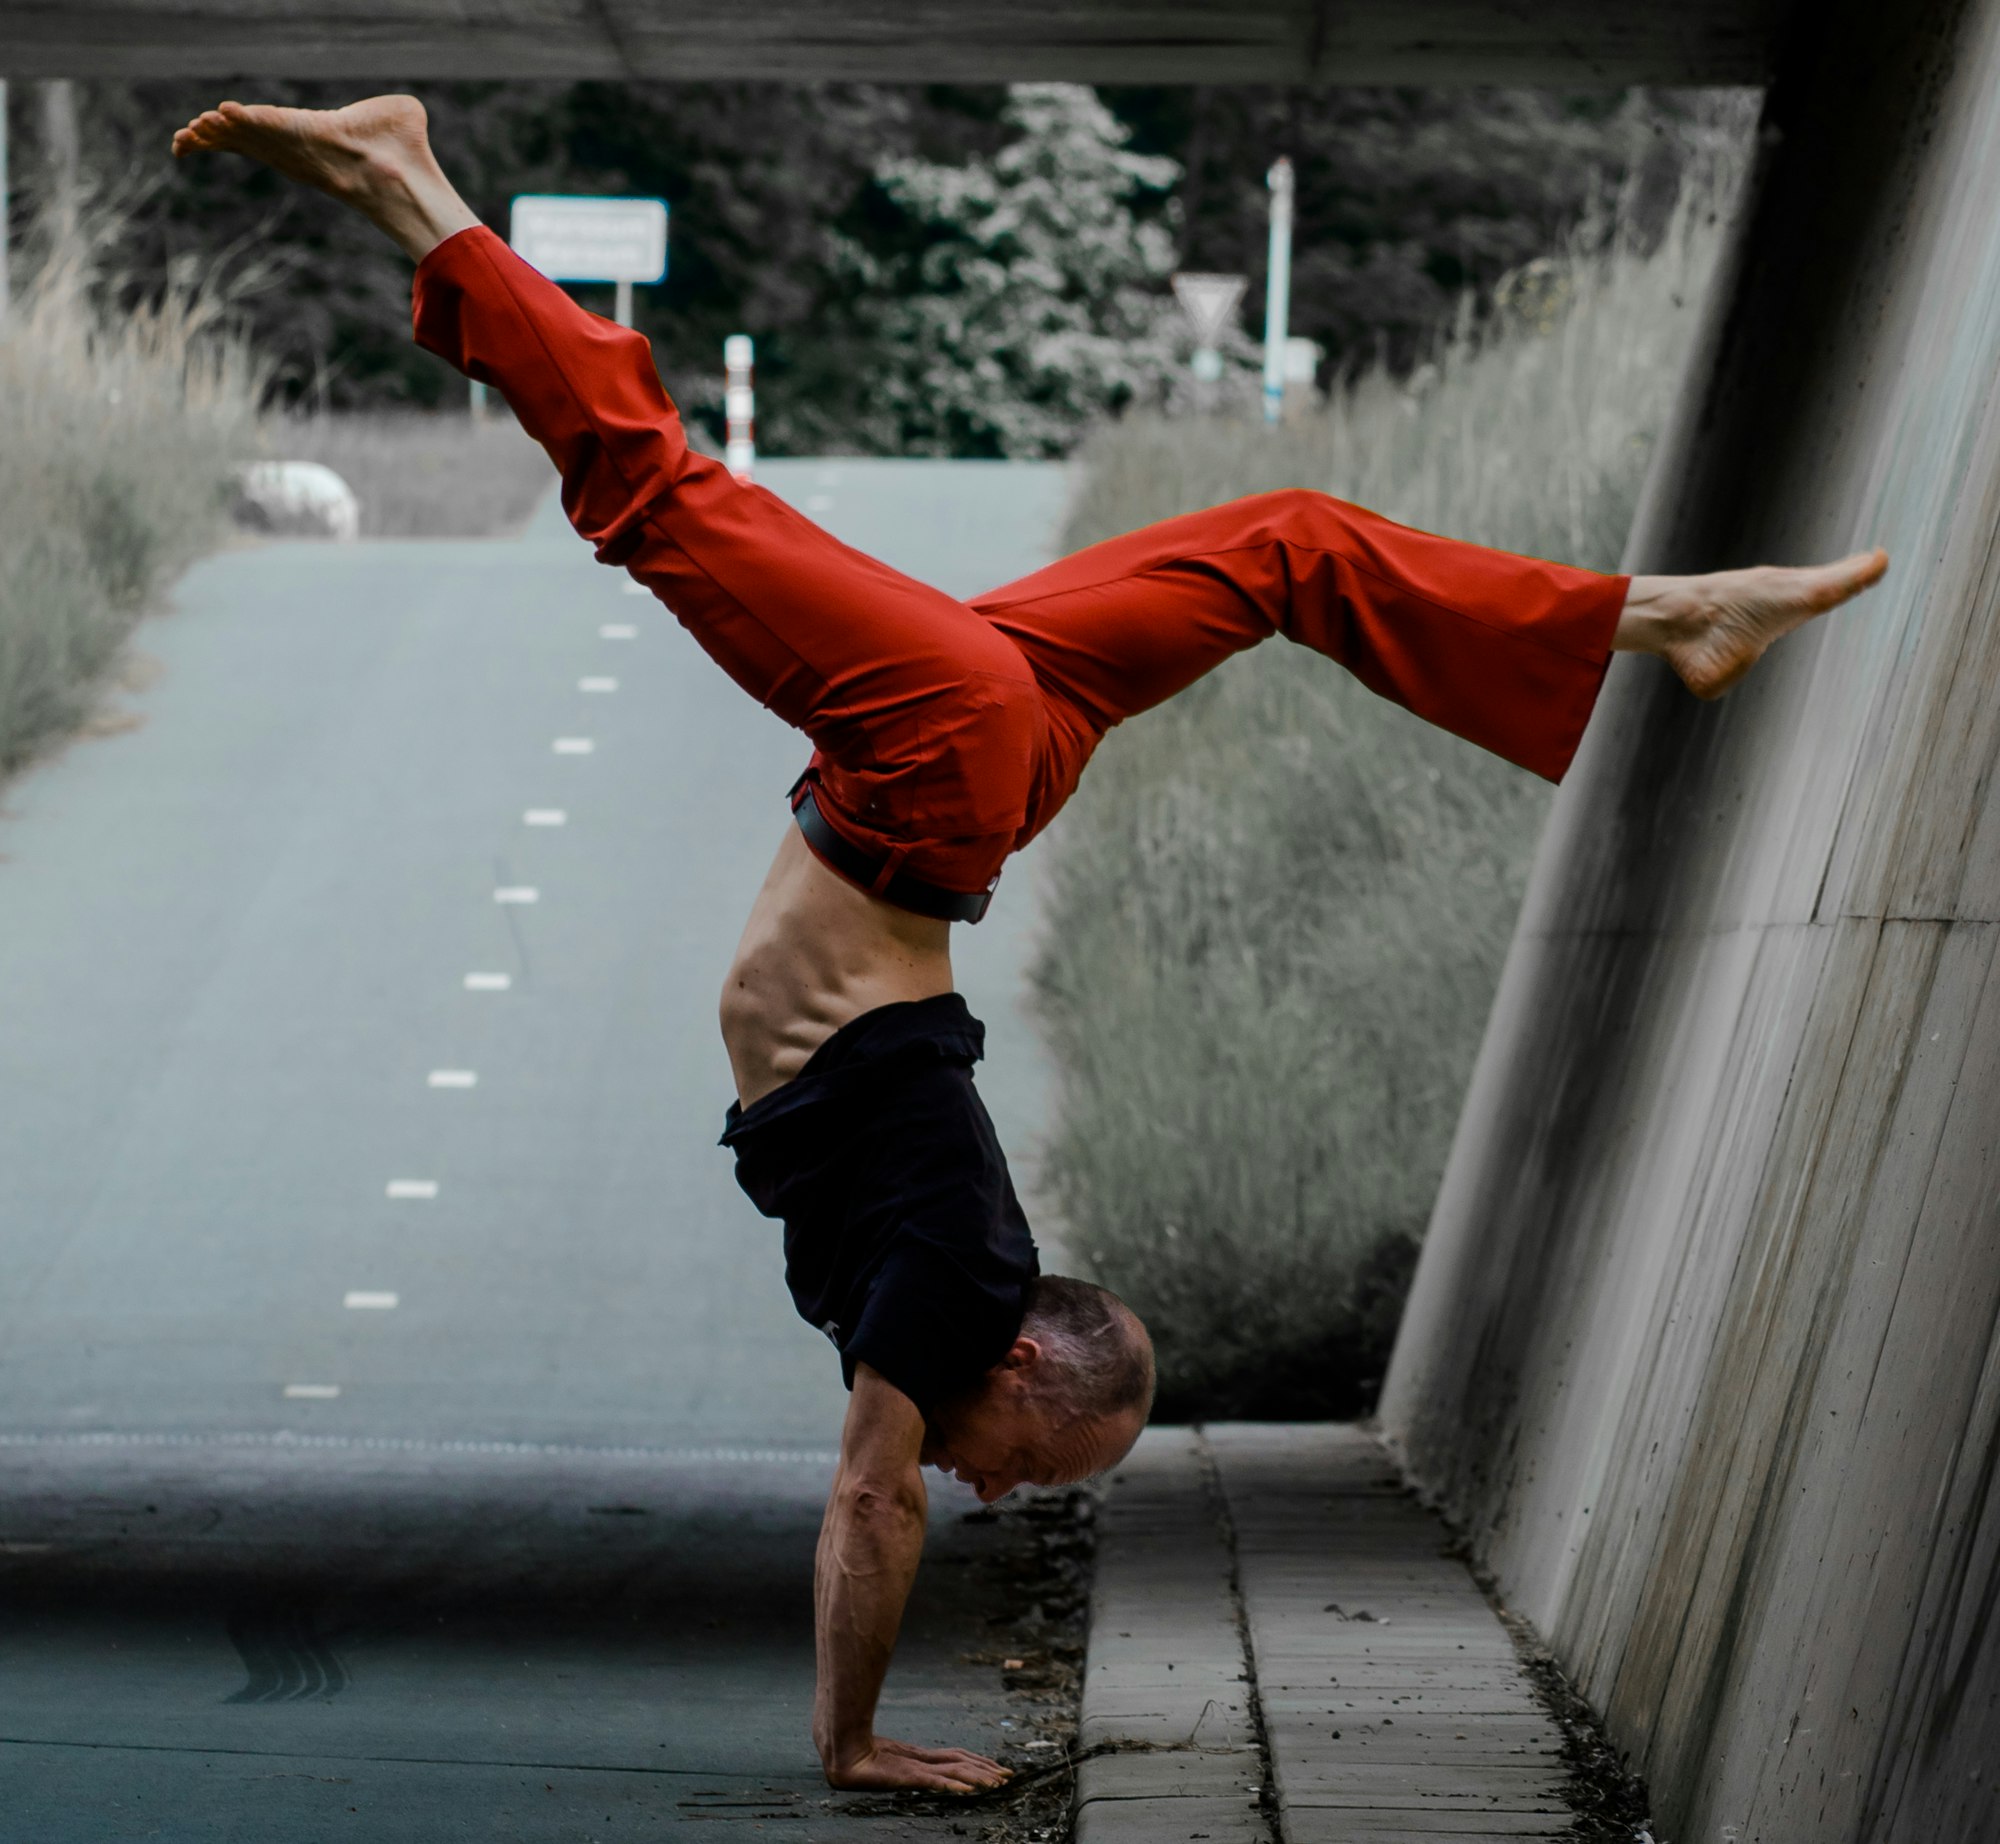 Bert here owns a yoga studio in Leeuwarden, Netherlands. He’s an amazing instructor and super creative!